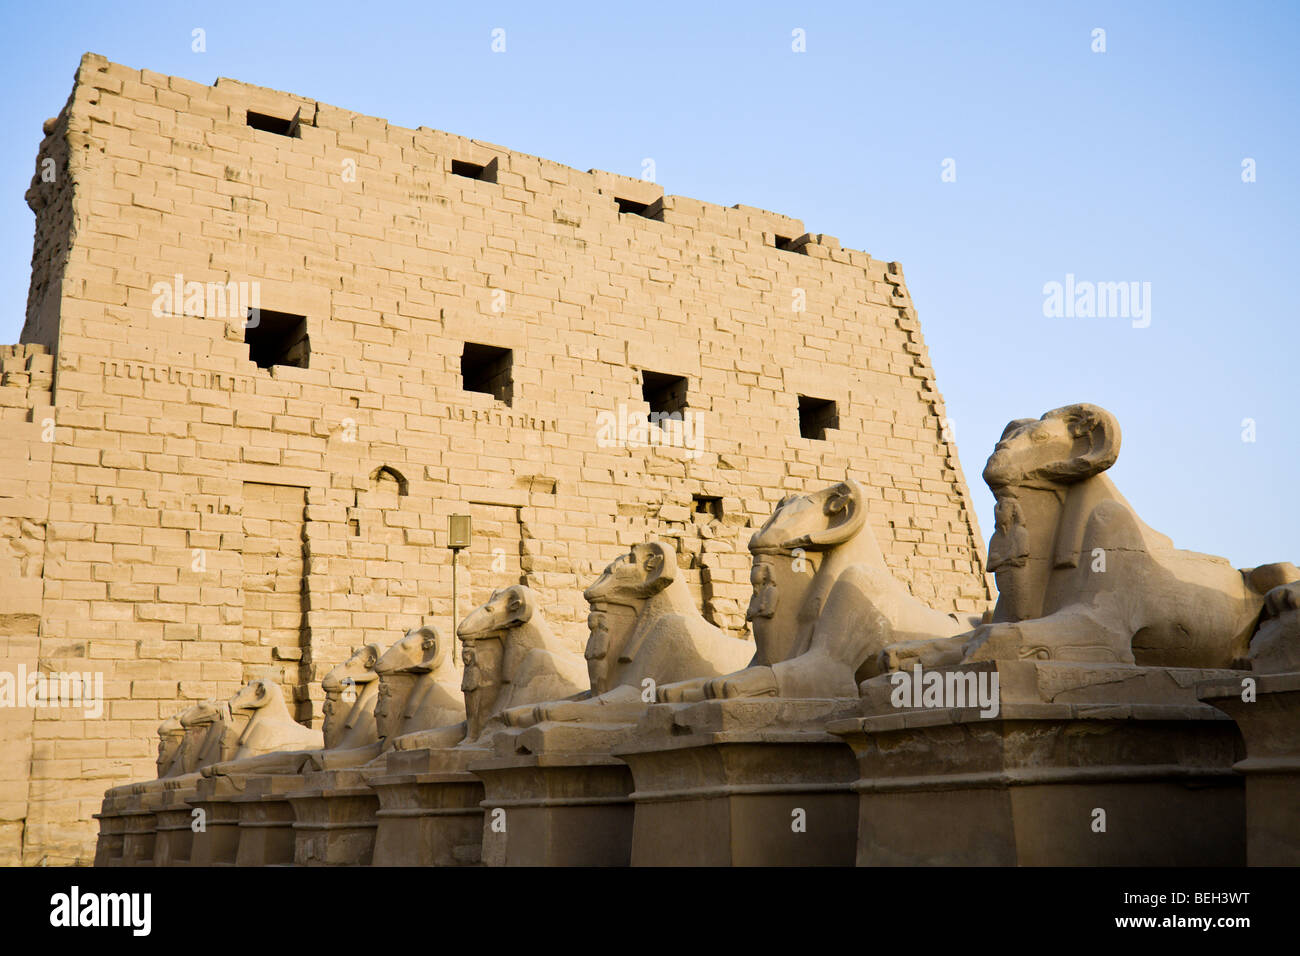 Karnak Temple with Alley of Ram Sphinxes, Luxor, Egypt Stock Photo